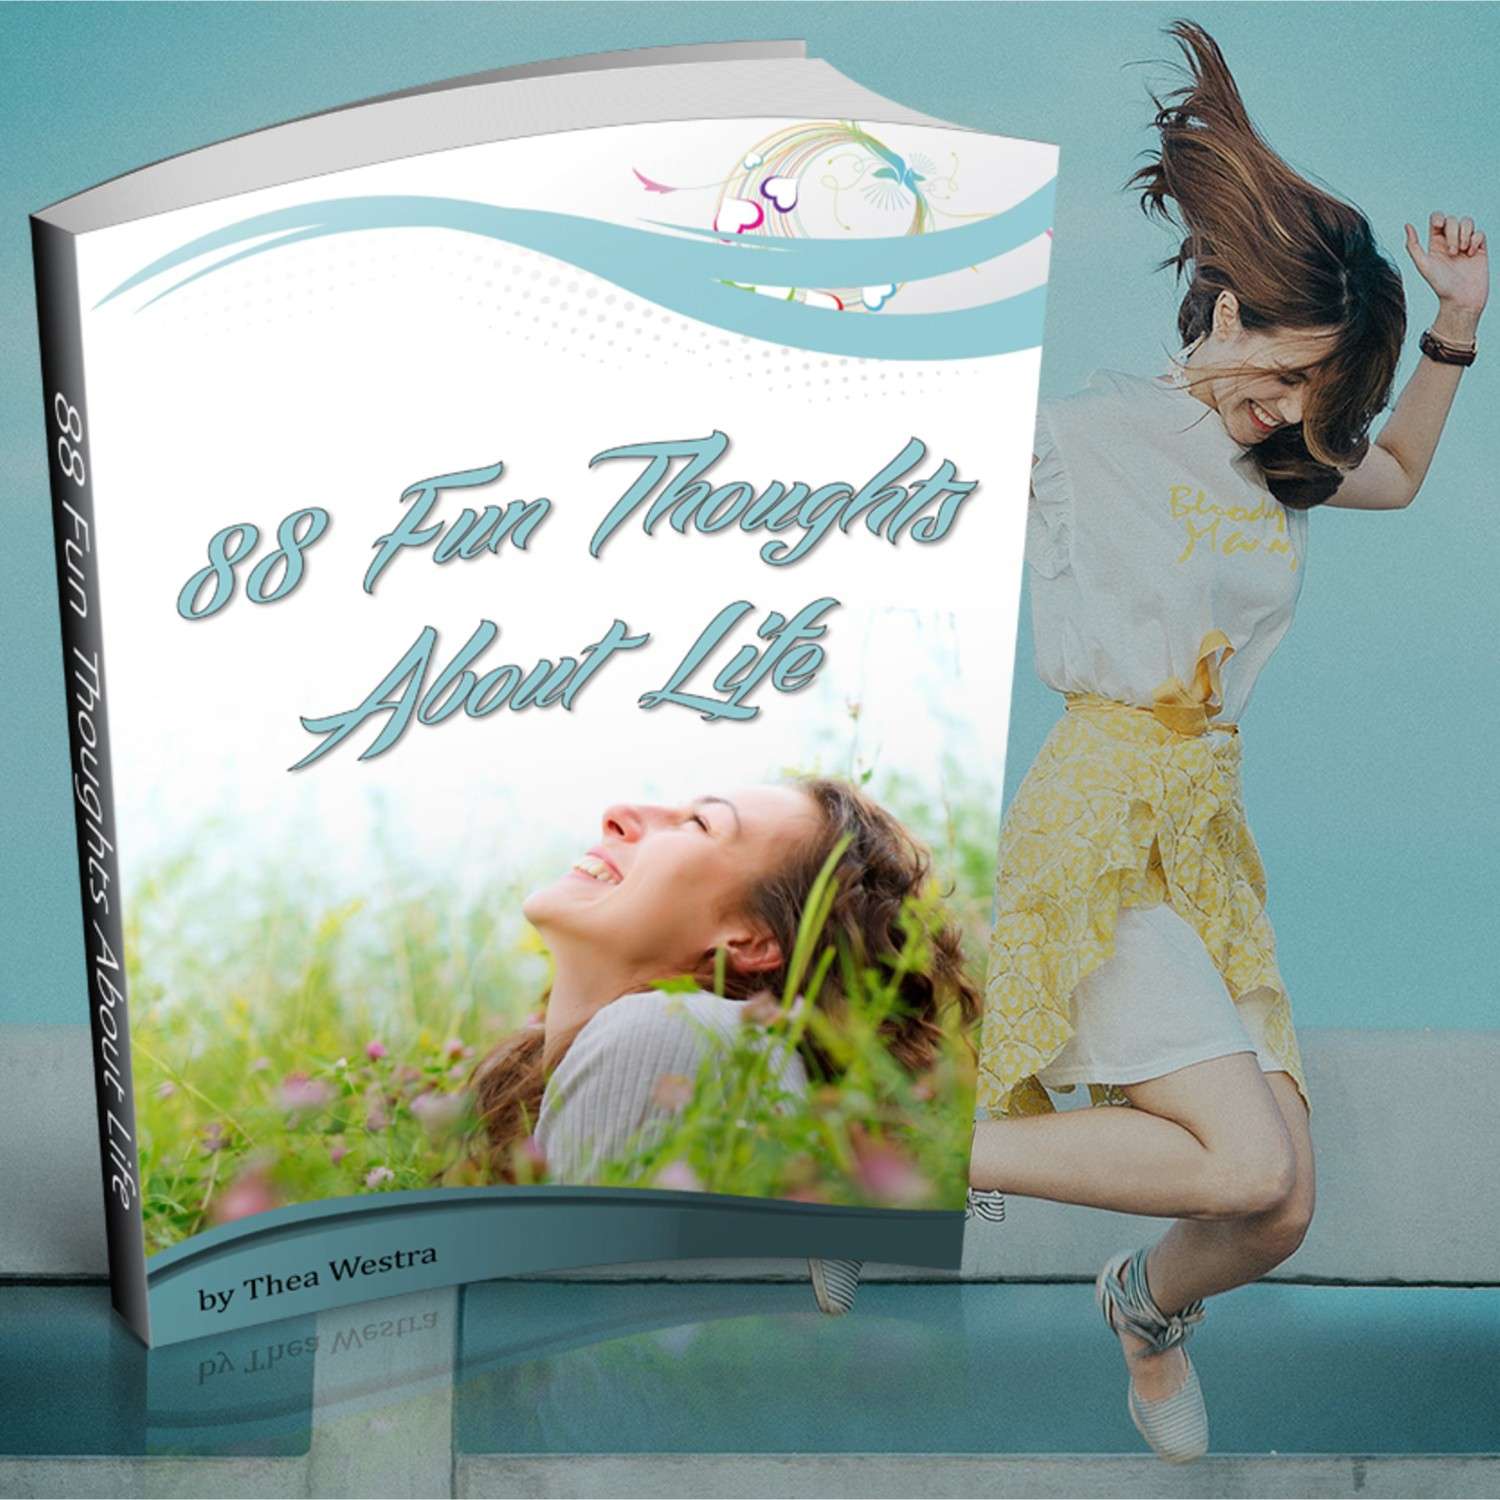 FREE EBOOK 88 Fun Thoughts About Life free ebook  <! --- NOTE: original size 1500px X 1500px. Change height & width to scale using https://selfimprovementgift.com/forwardsteps/image-resize/ -- >